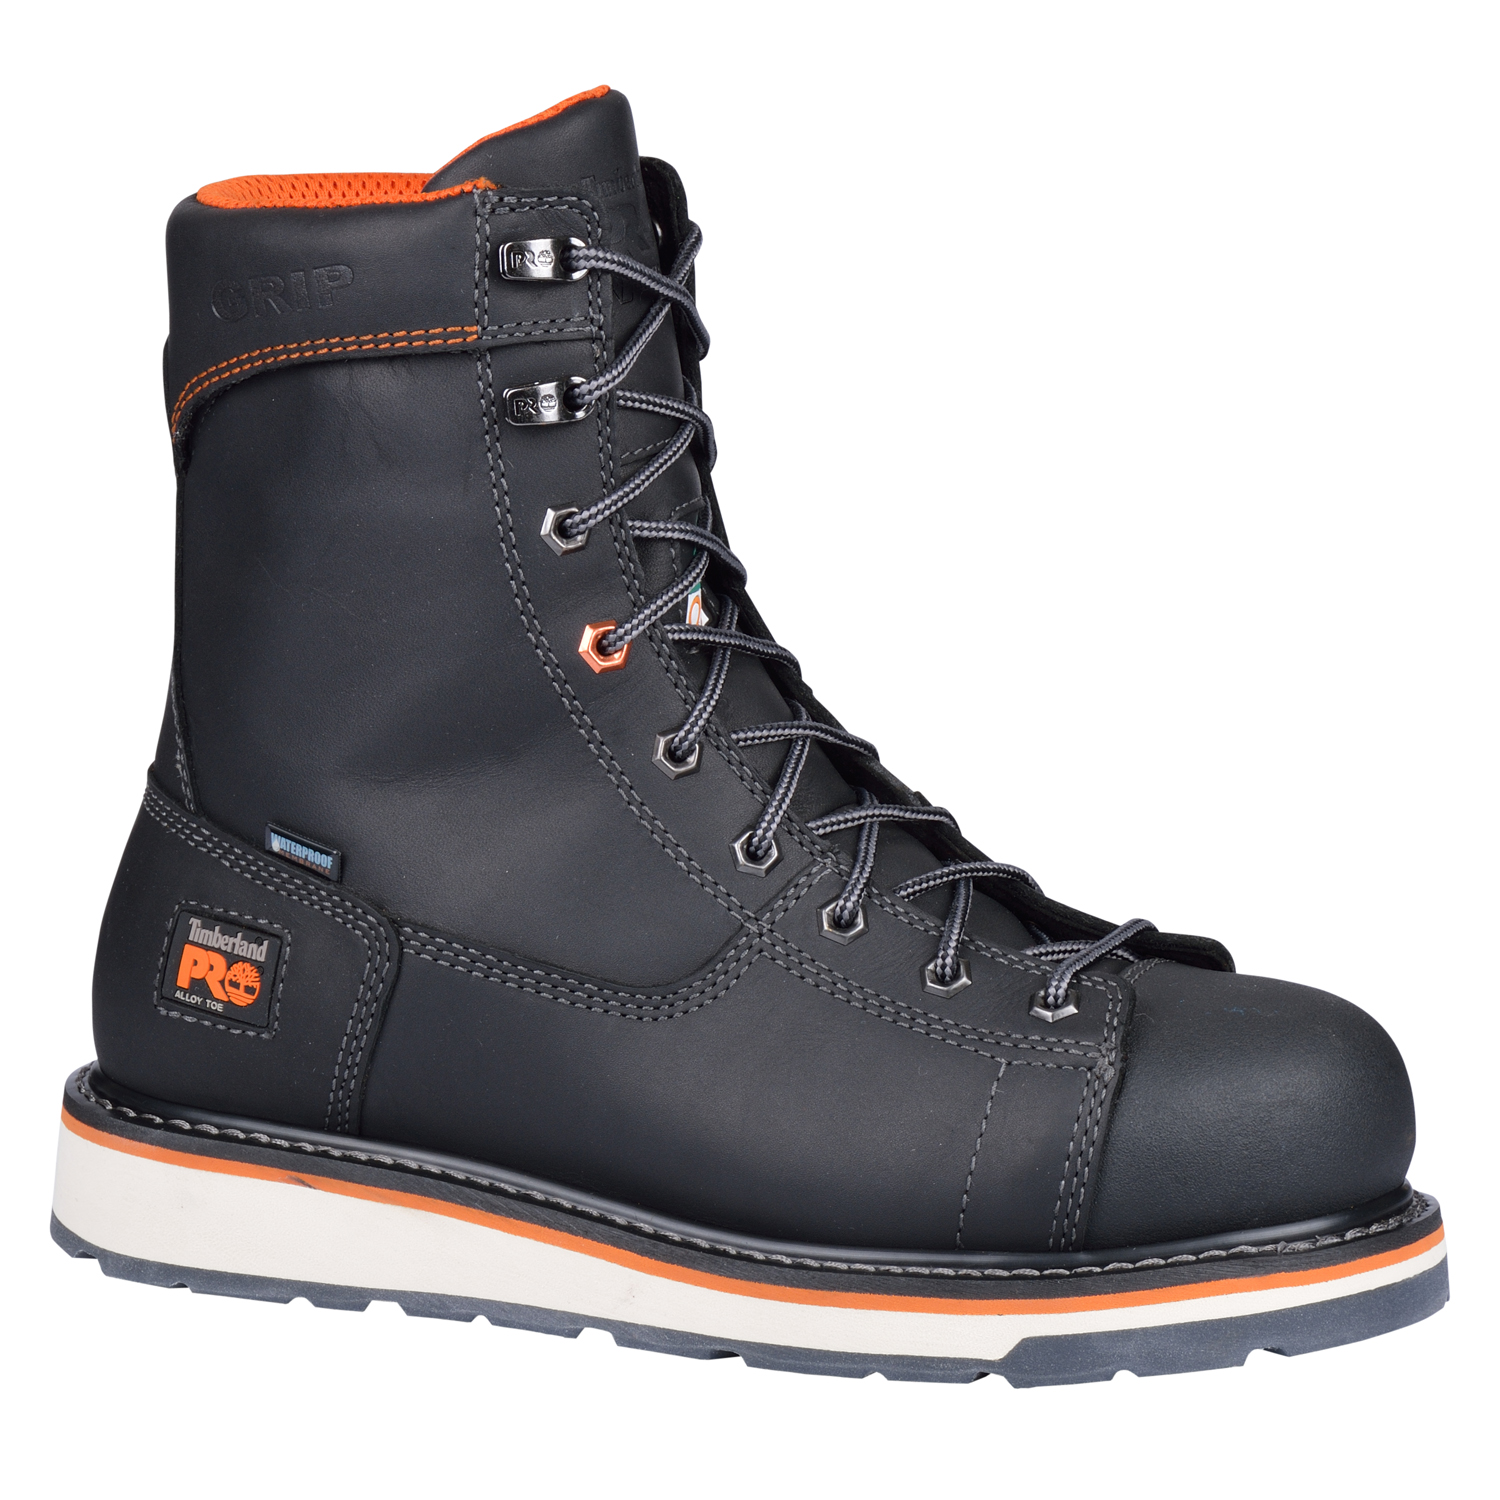 Timberland PRO Safety shoes - Canada 